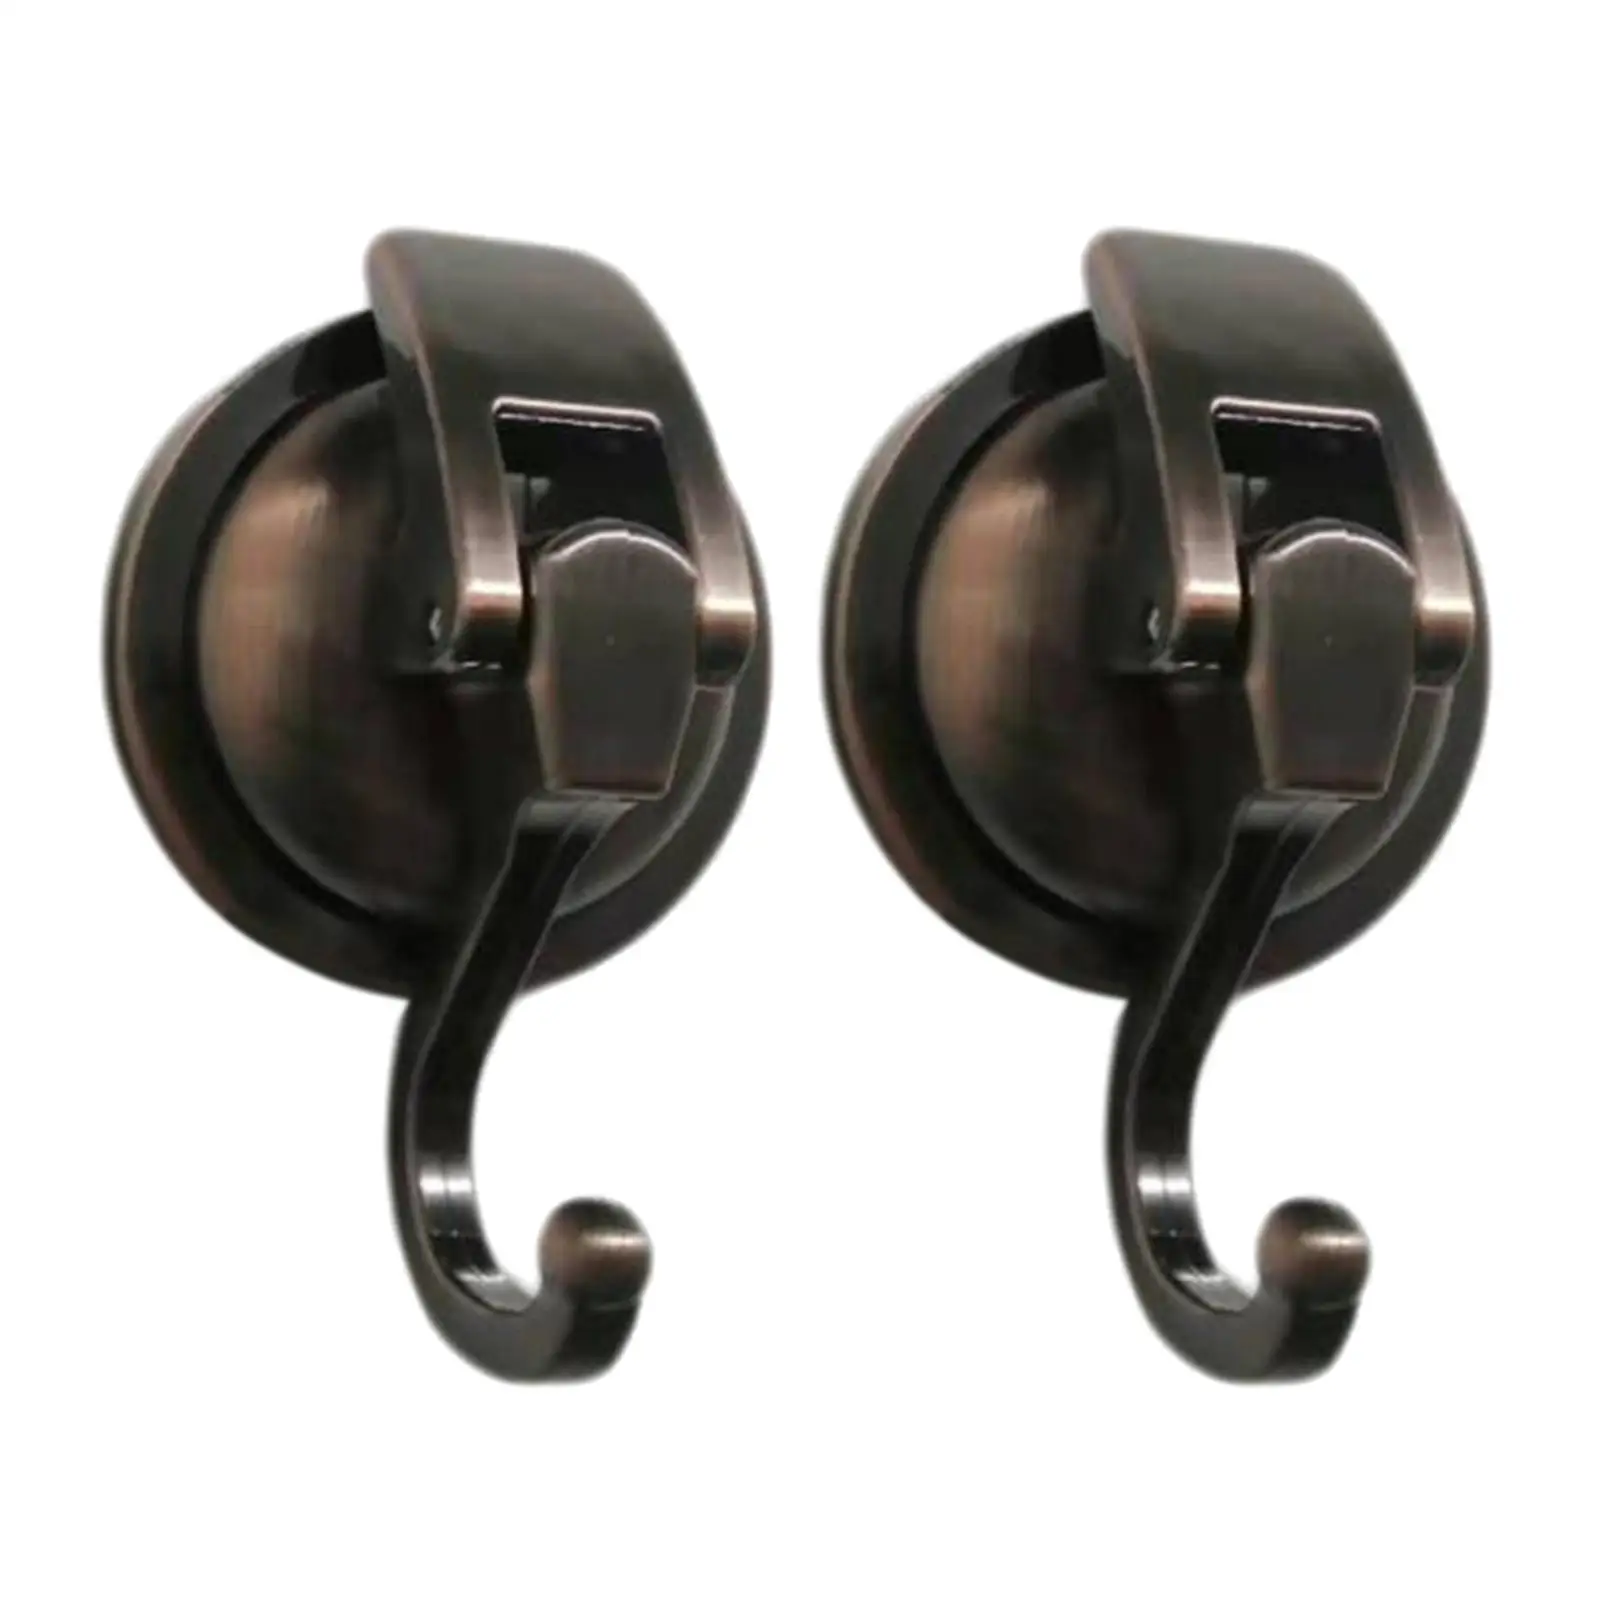 2 Pieces Powerful Vacuum Suction Cup Hooks Easy to Install and Remove No Drilling Wreath Cup Hook for Glass Door Bathroom Coat